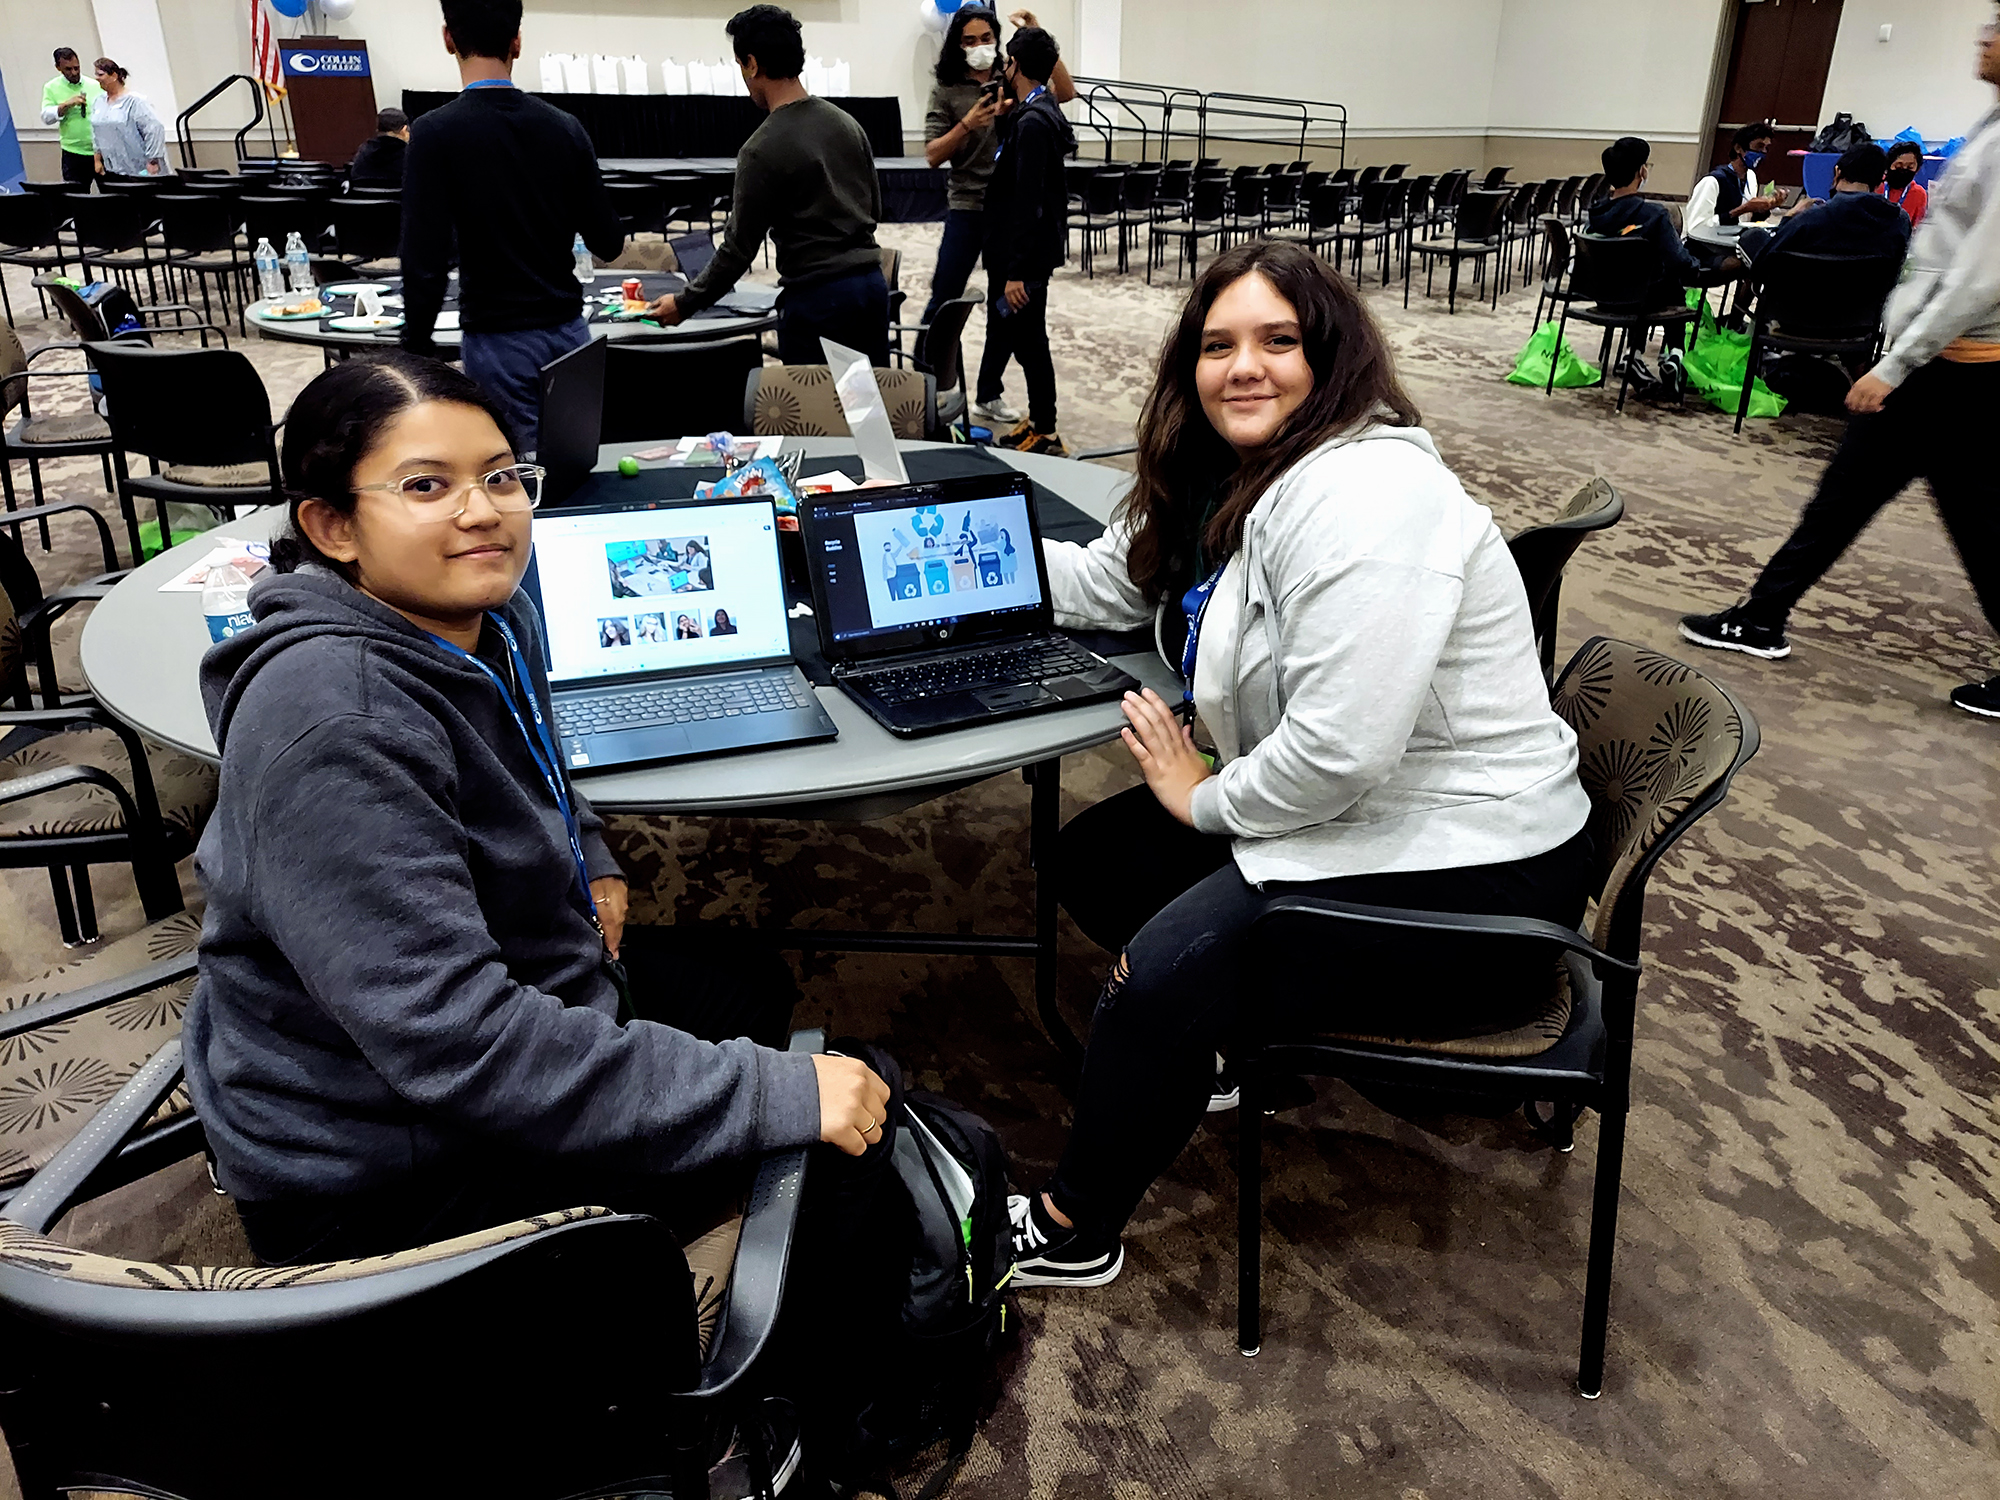 Students work on laptops at the Collin College Hackathon